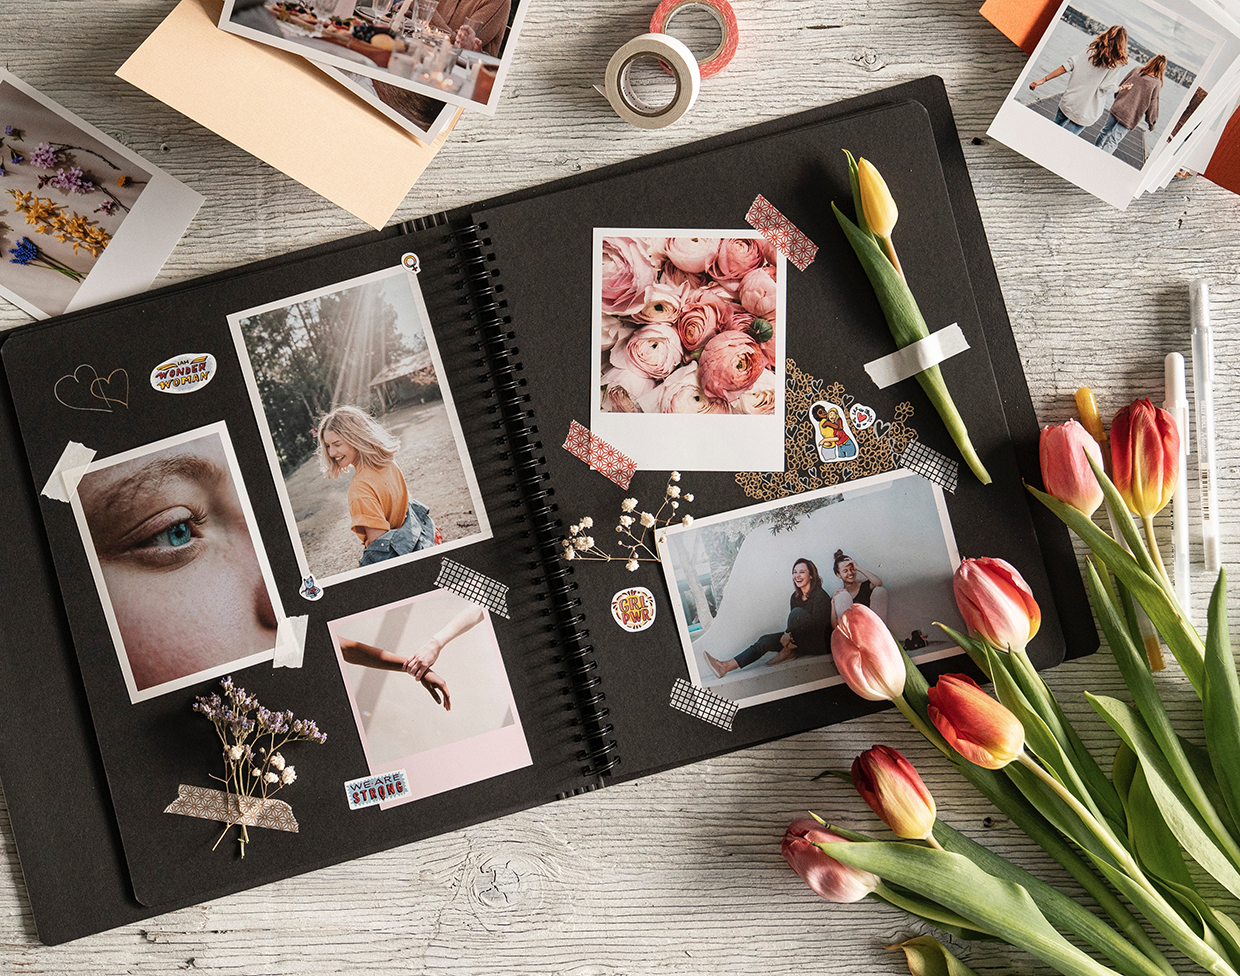  DIY Photo Album Scrapbook 80 Pages, Adkwse 3 Ring